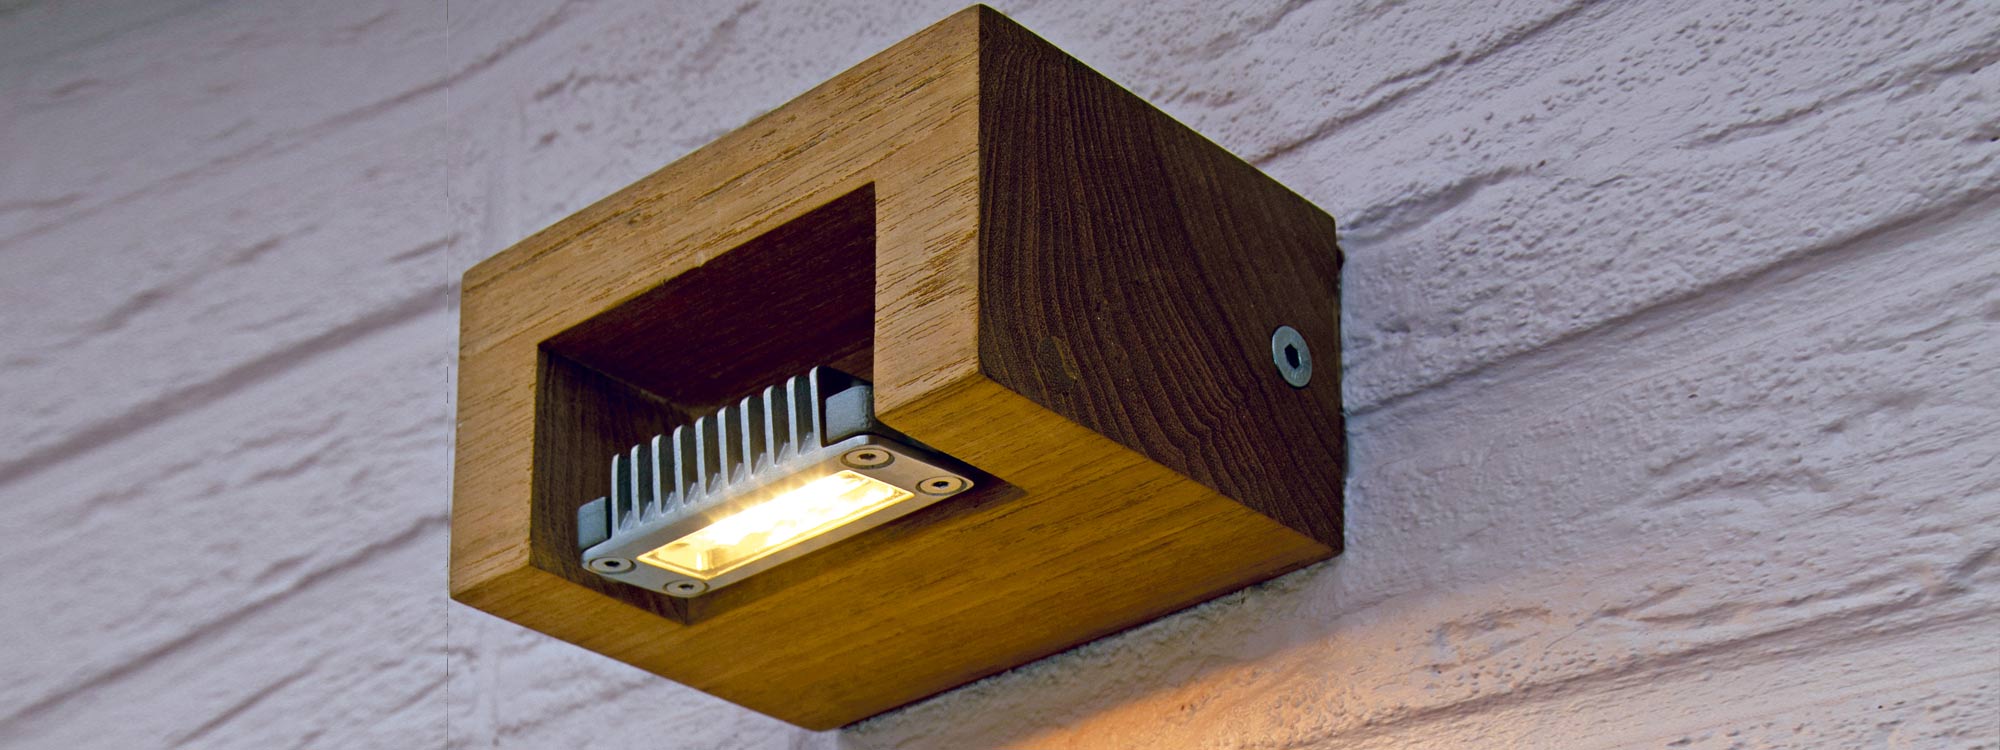 Image of Royal Botania log adjustable outdoor wall light in teak and stainless steel, shown on whitewashed brick wall